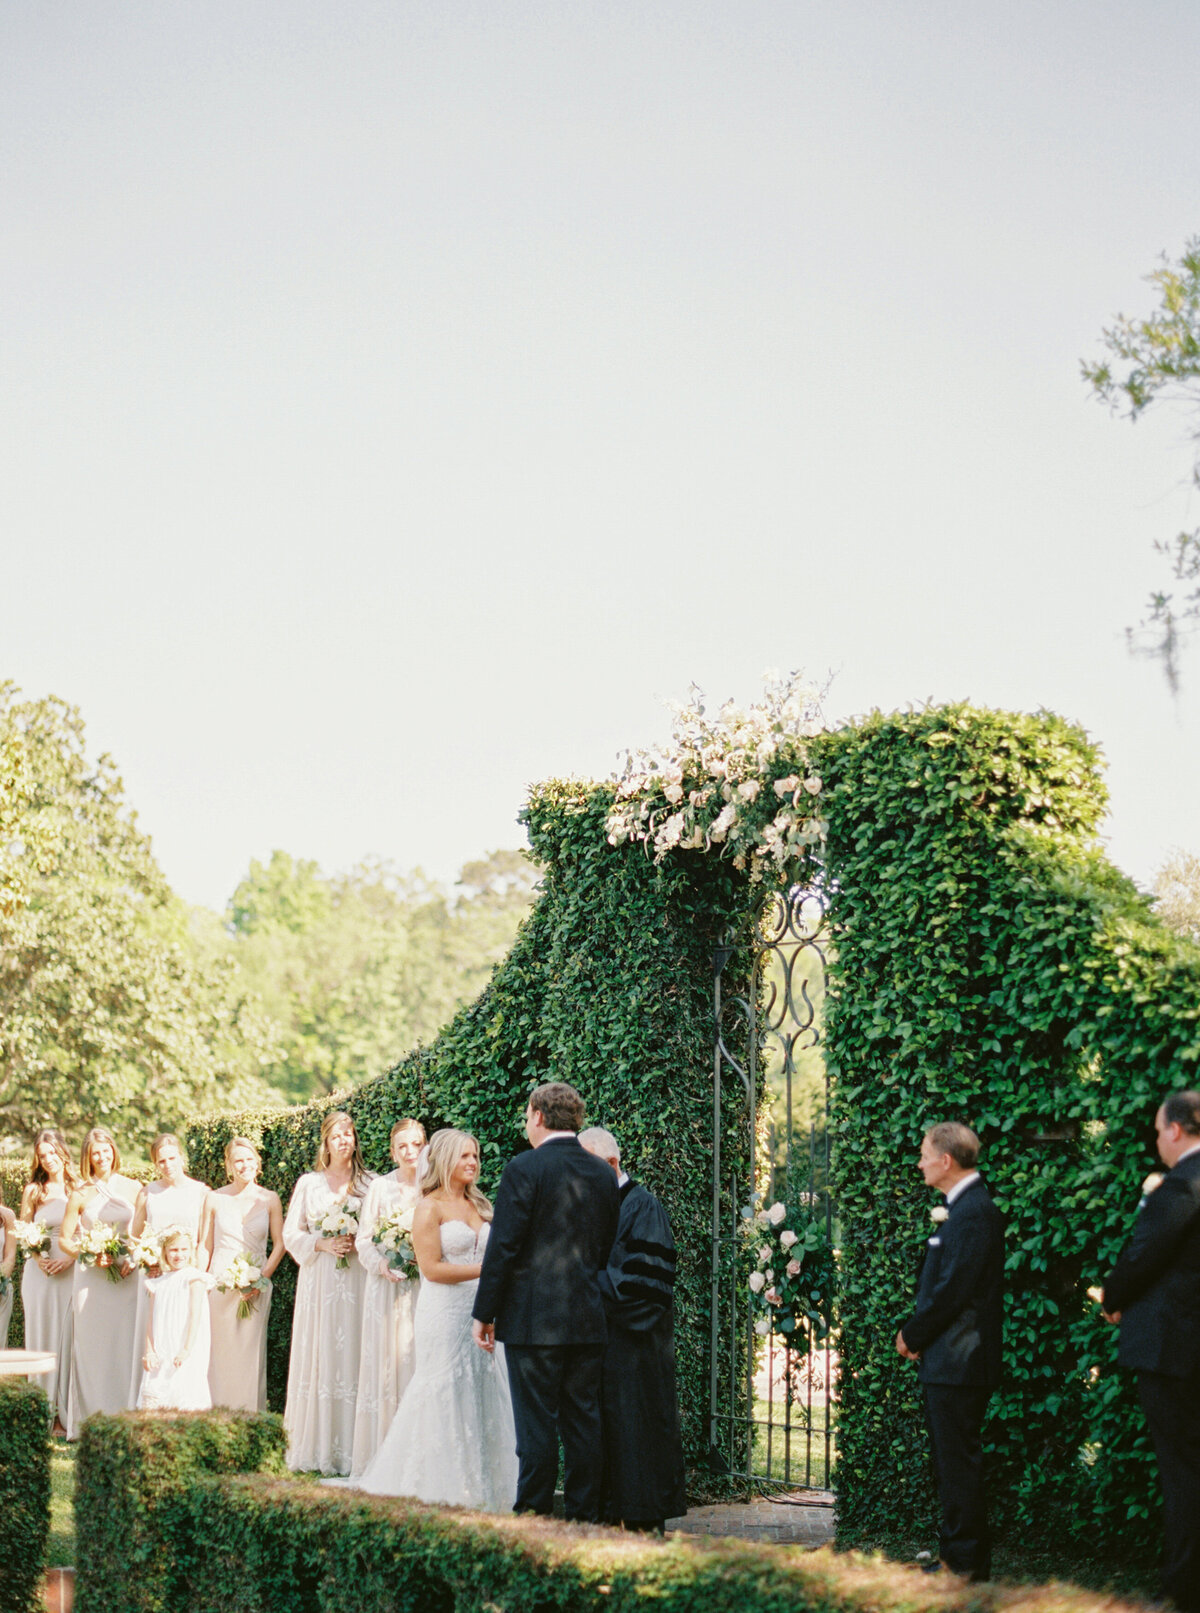 A wedding at Pebble Hill in Thomasville GA - 16